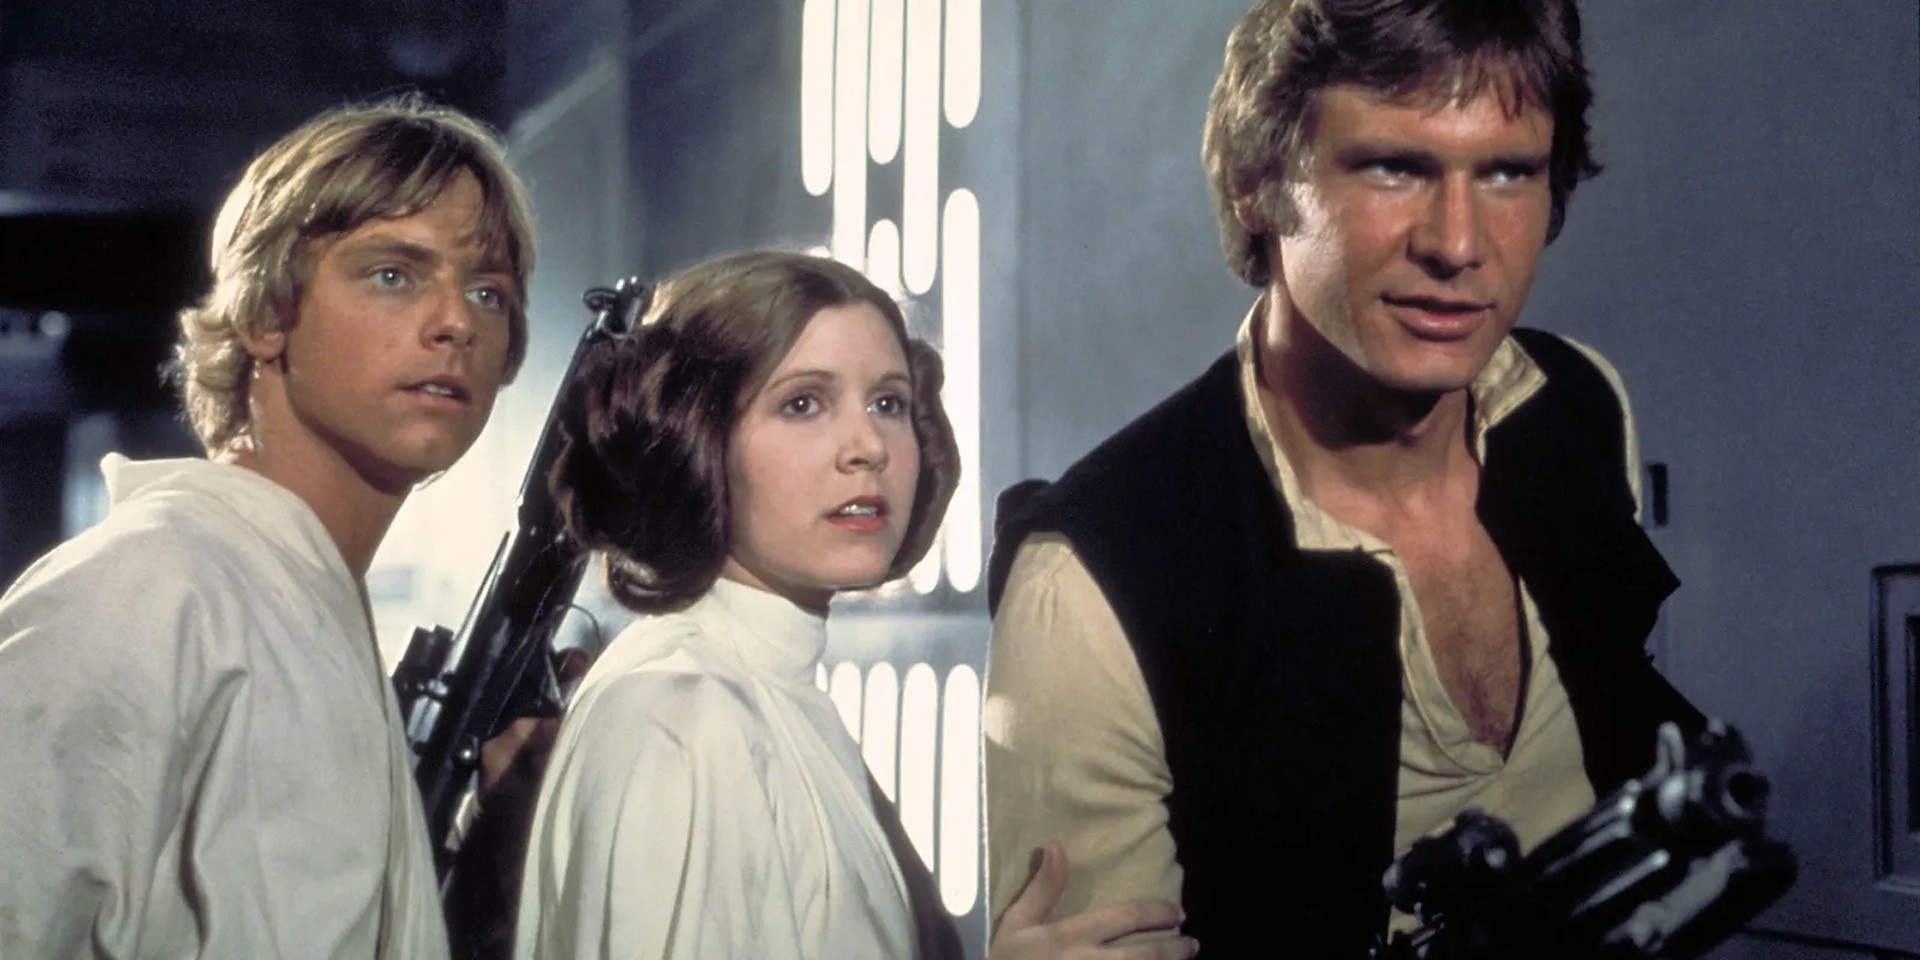 Star Wars: A New Hope in Concert in Manila has been postponed to 2021